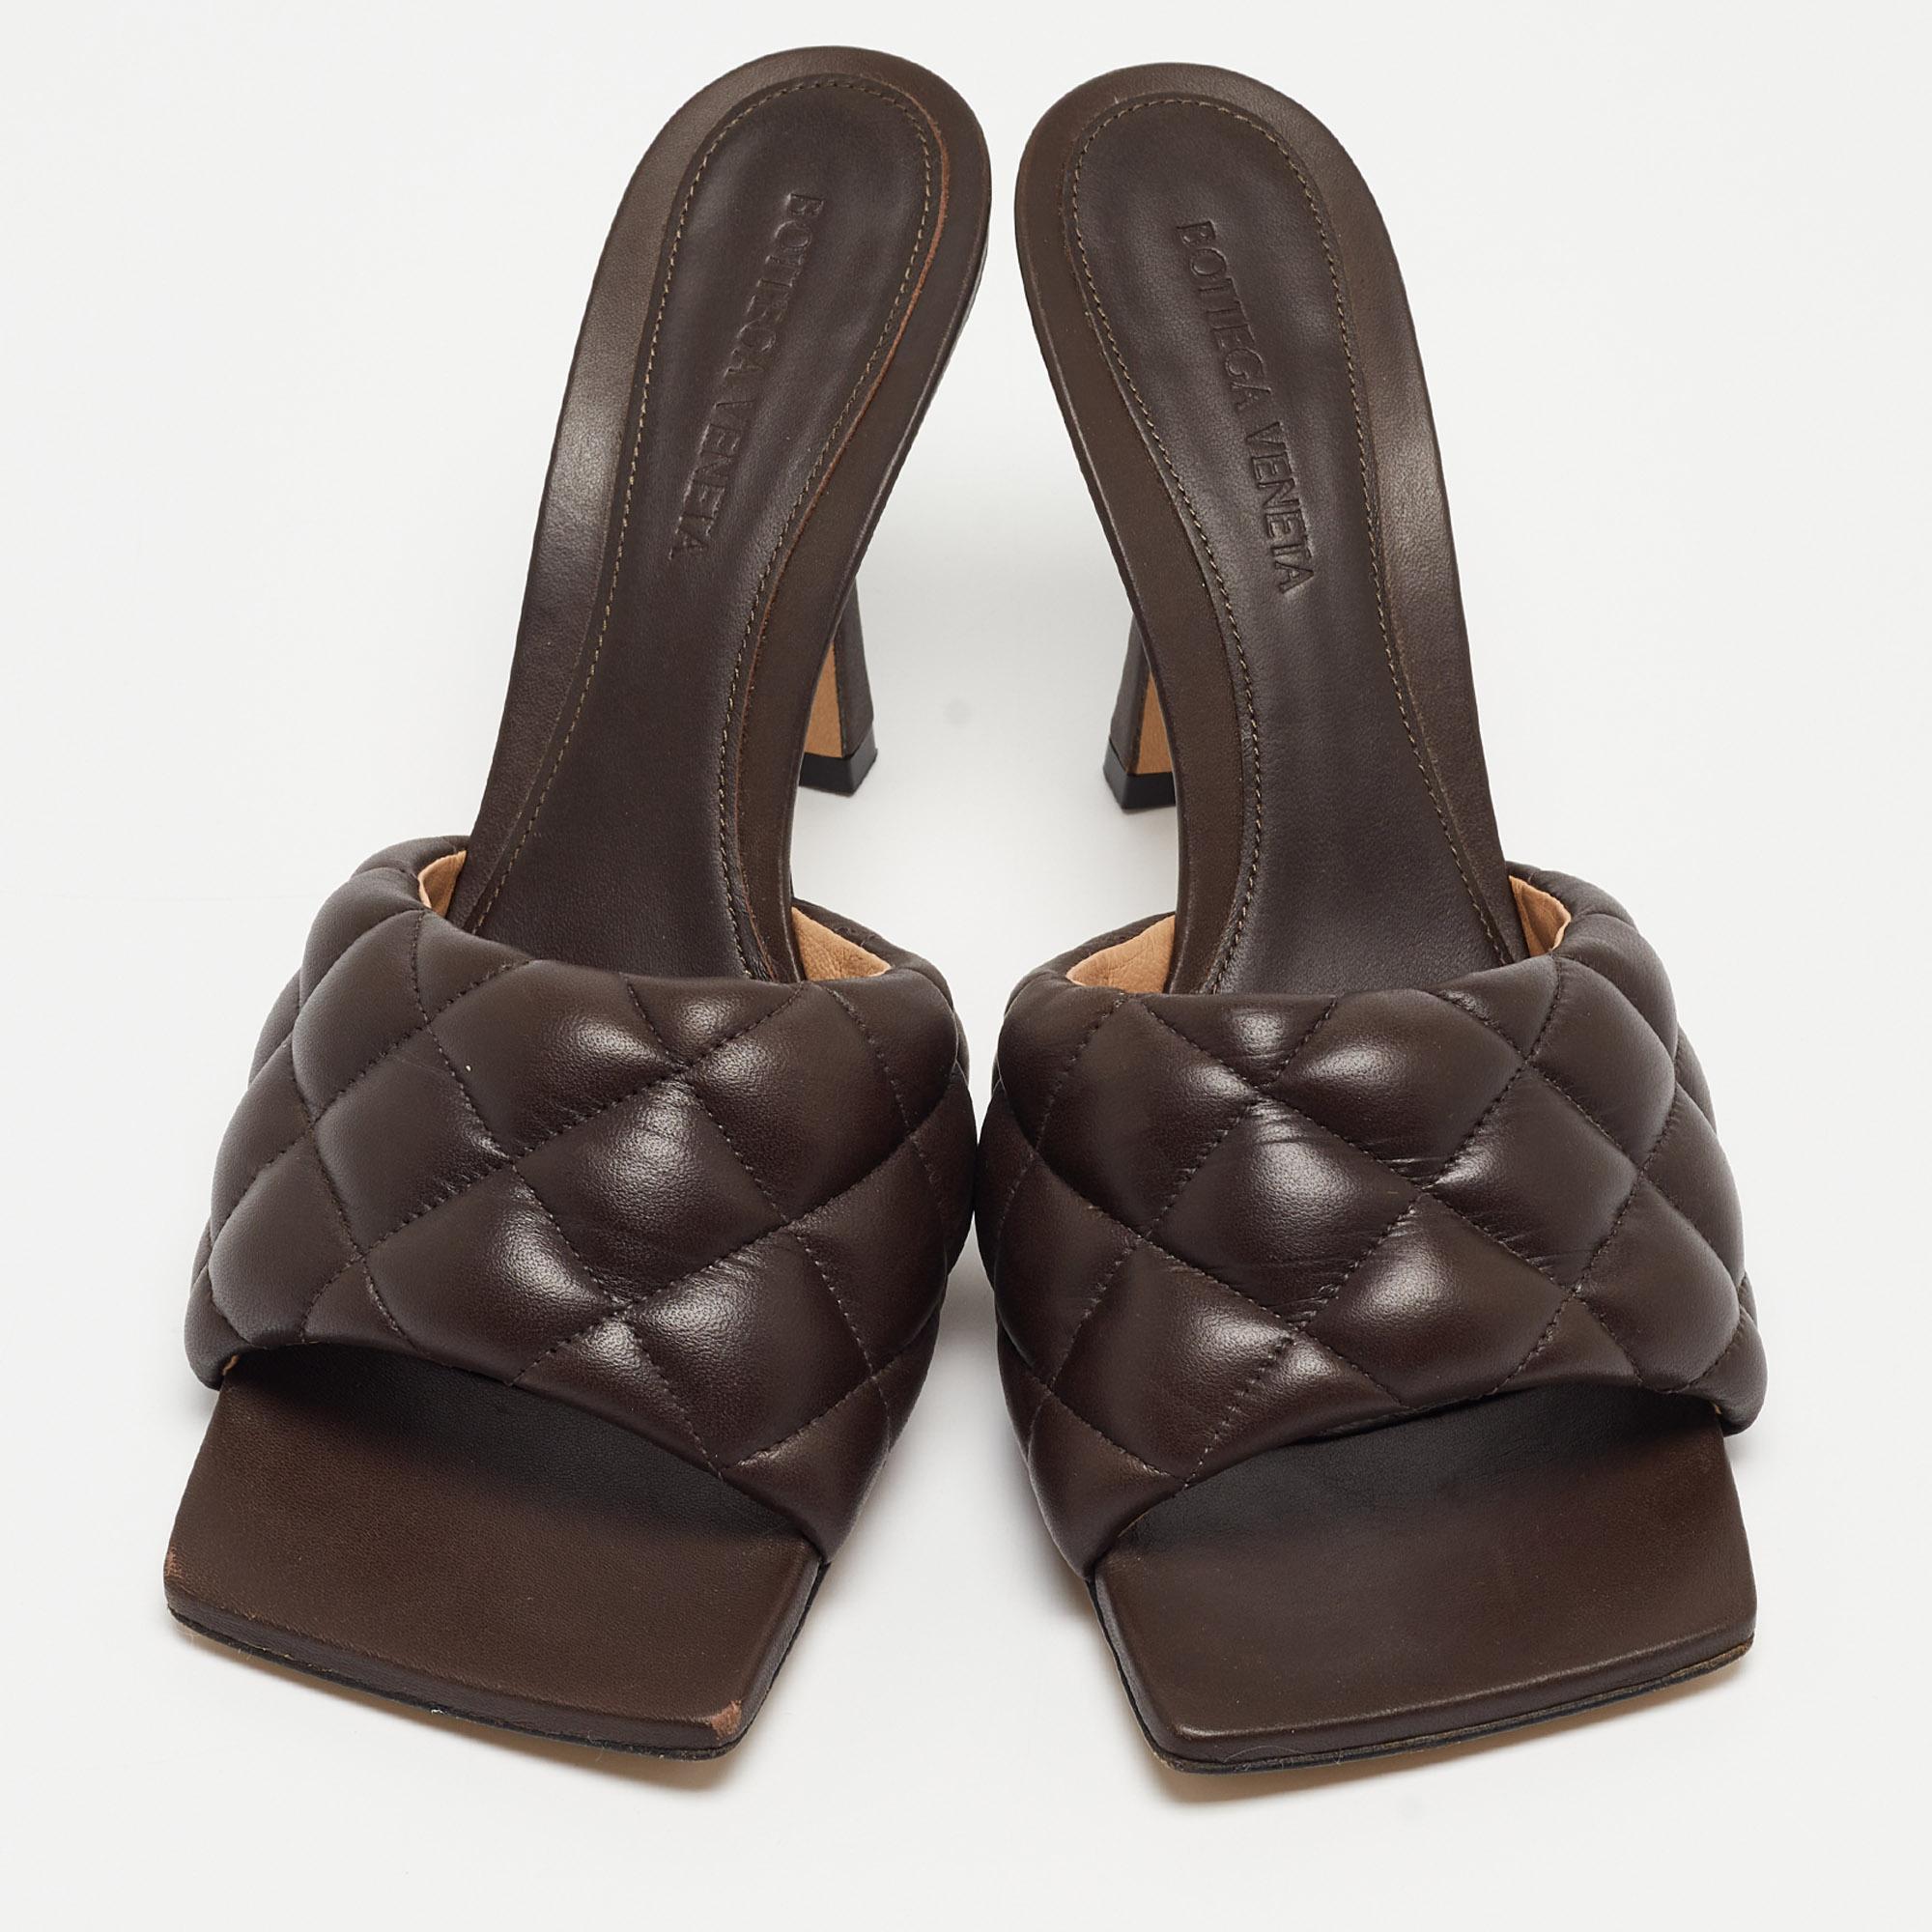 Bottega Veneta's list of trend-setting designs is only growing, and we can guess why! From the Lido sandals to the Pouch, the brand's offerings are anything but ordinary. We have here these amazing Lido slides, made from brown leather with